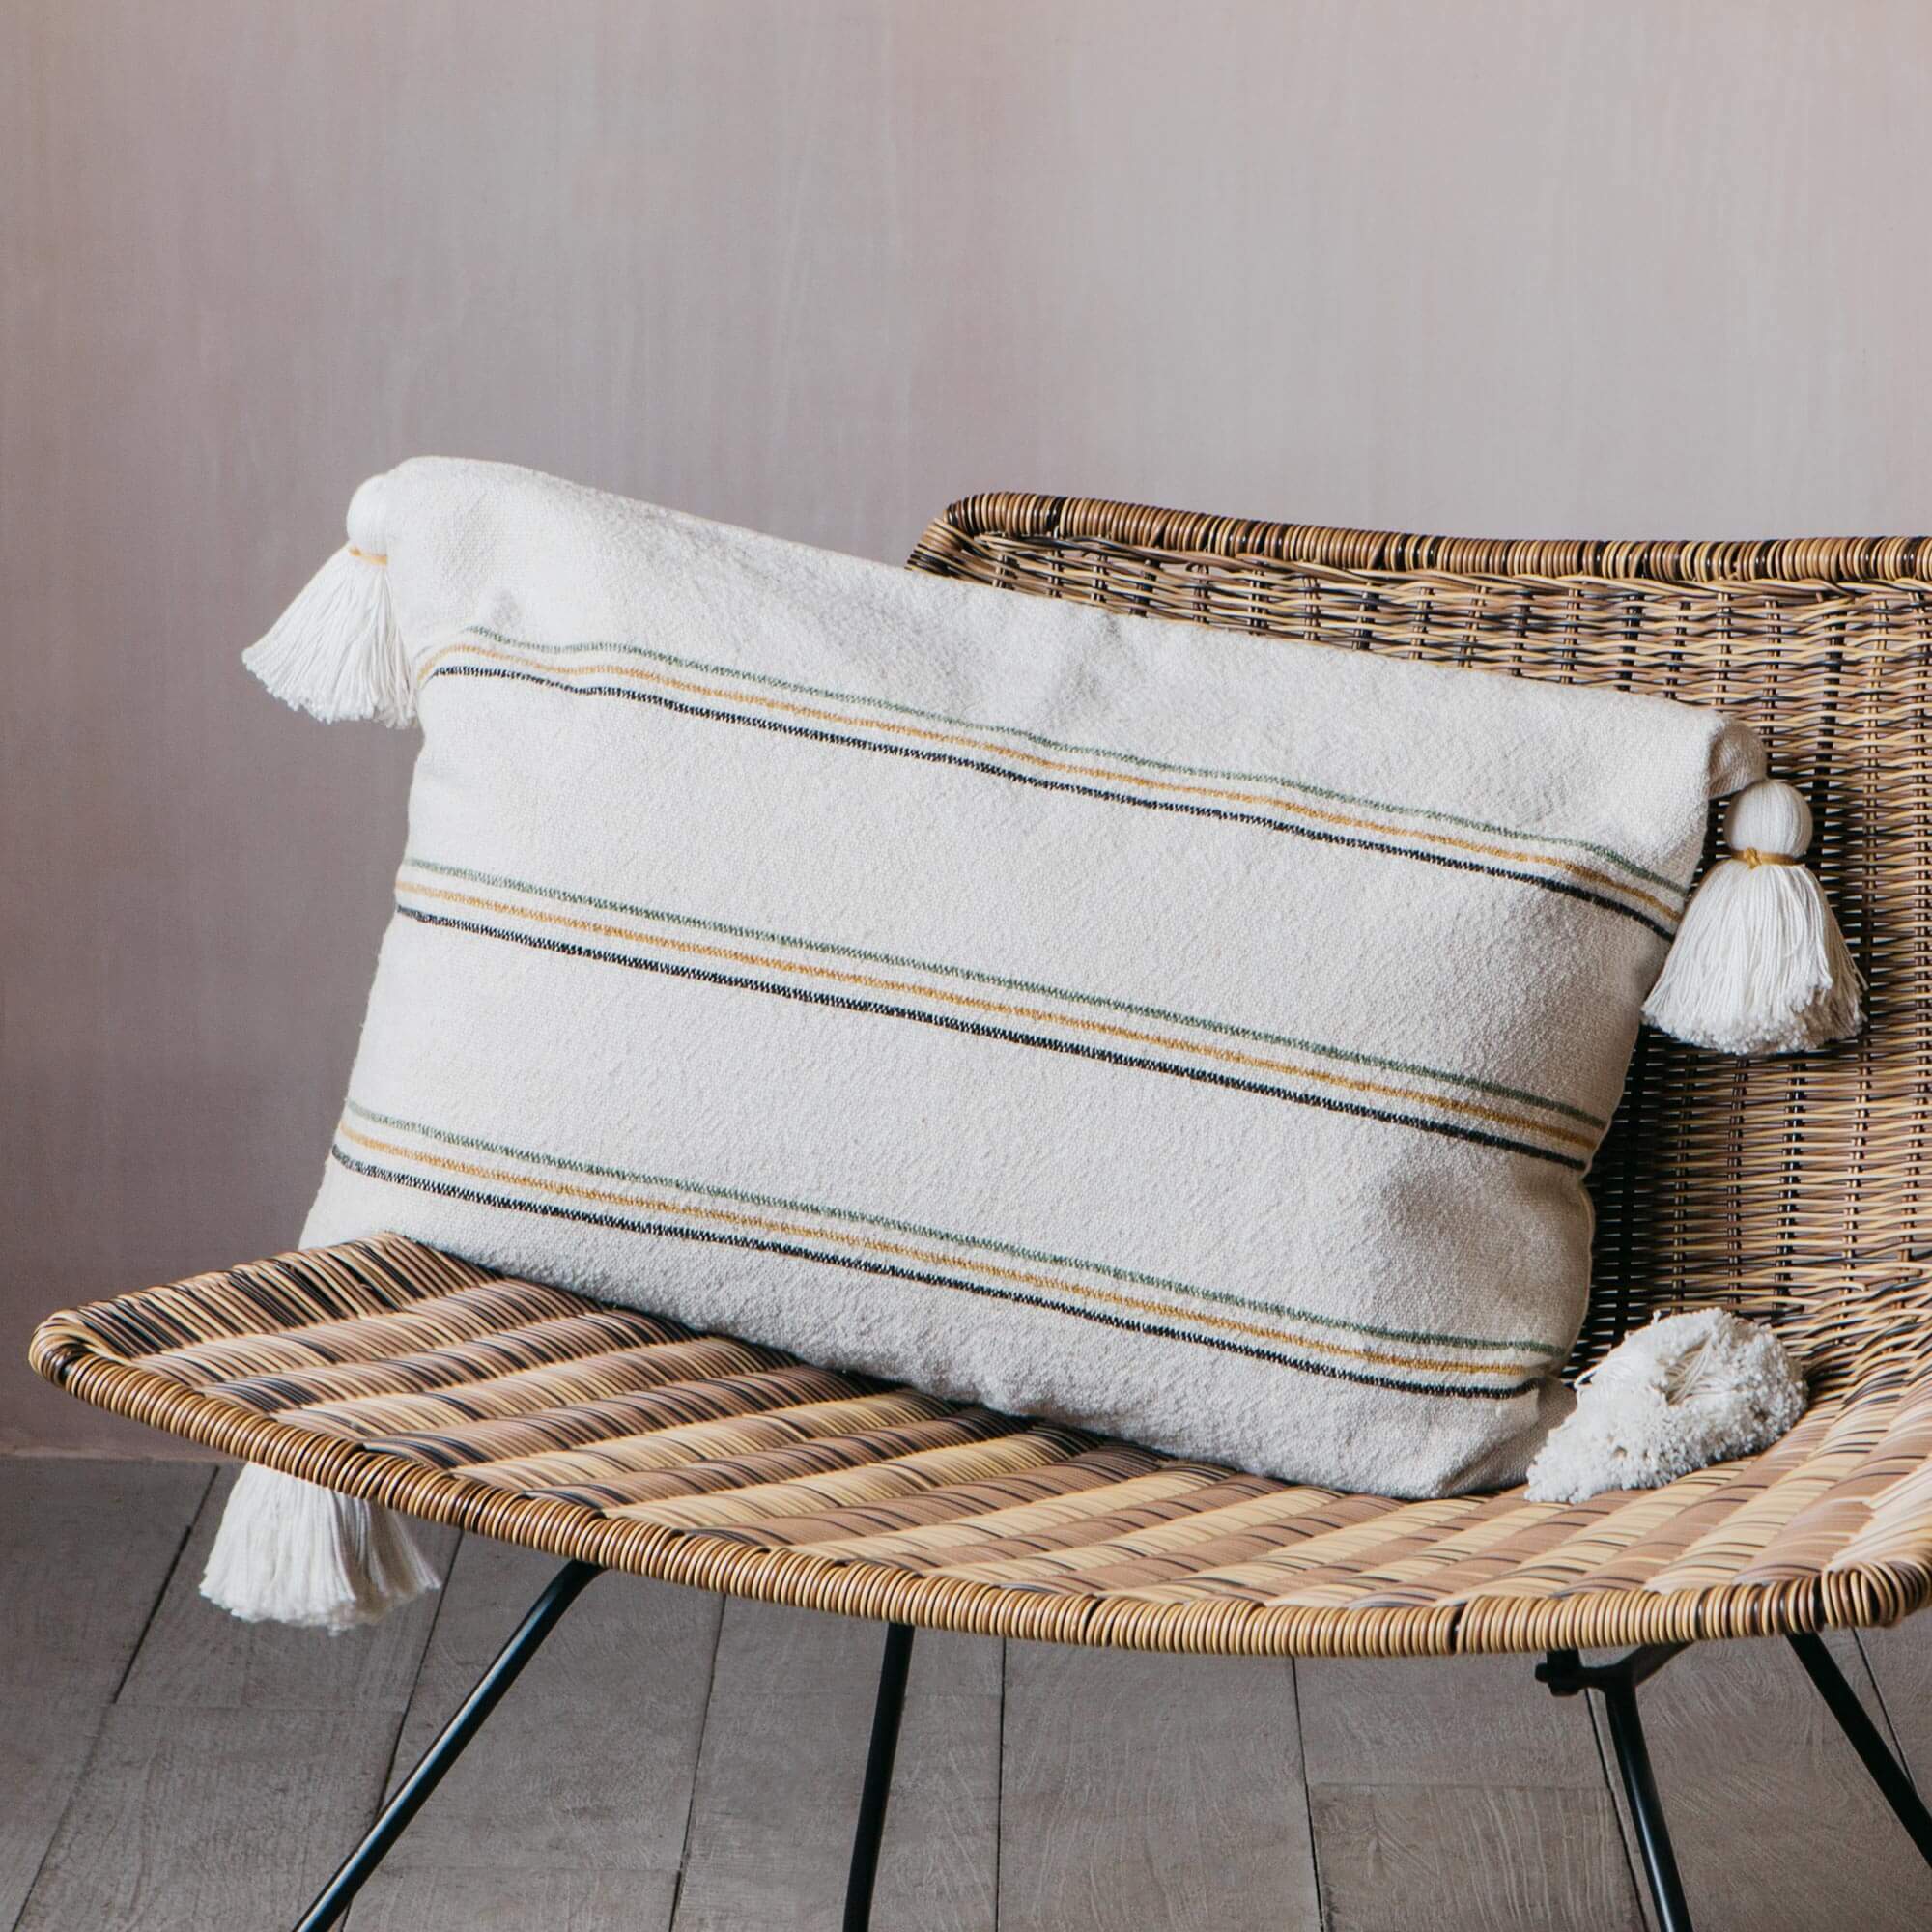 Read more about Graham and green cream pinstripe cushion